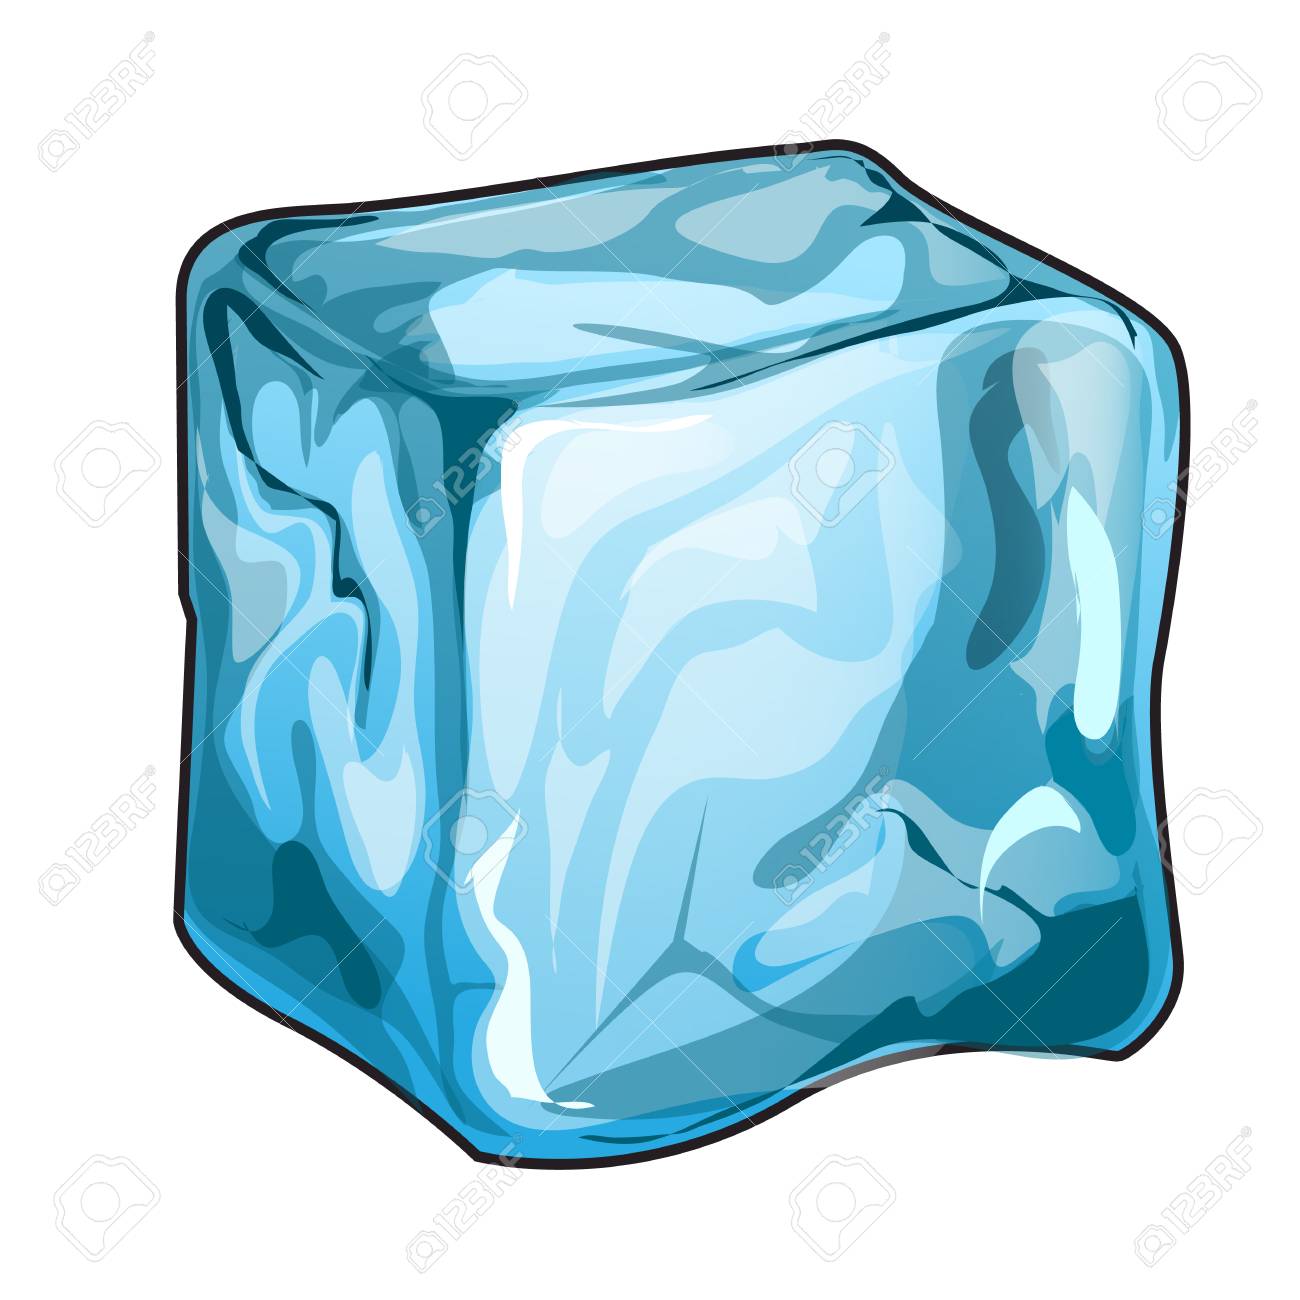 Single Ice Cube Isolated On A White Background Vector Cartoon